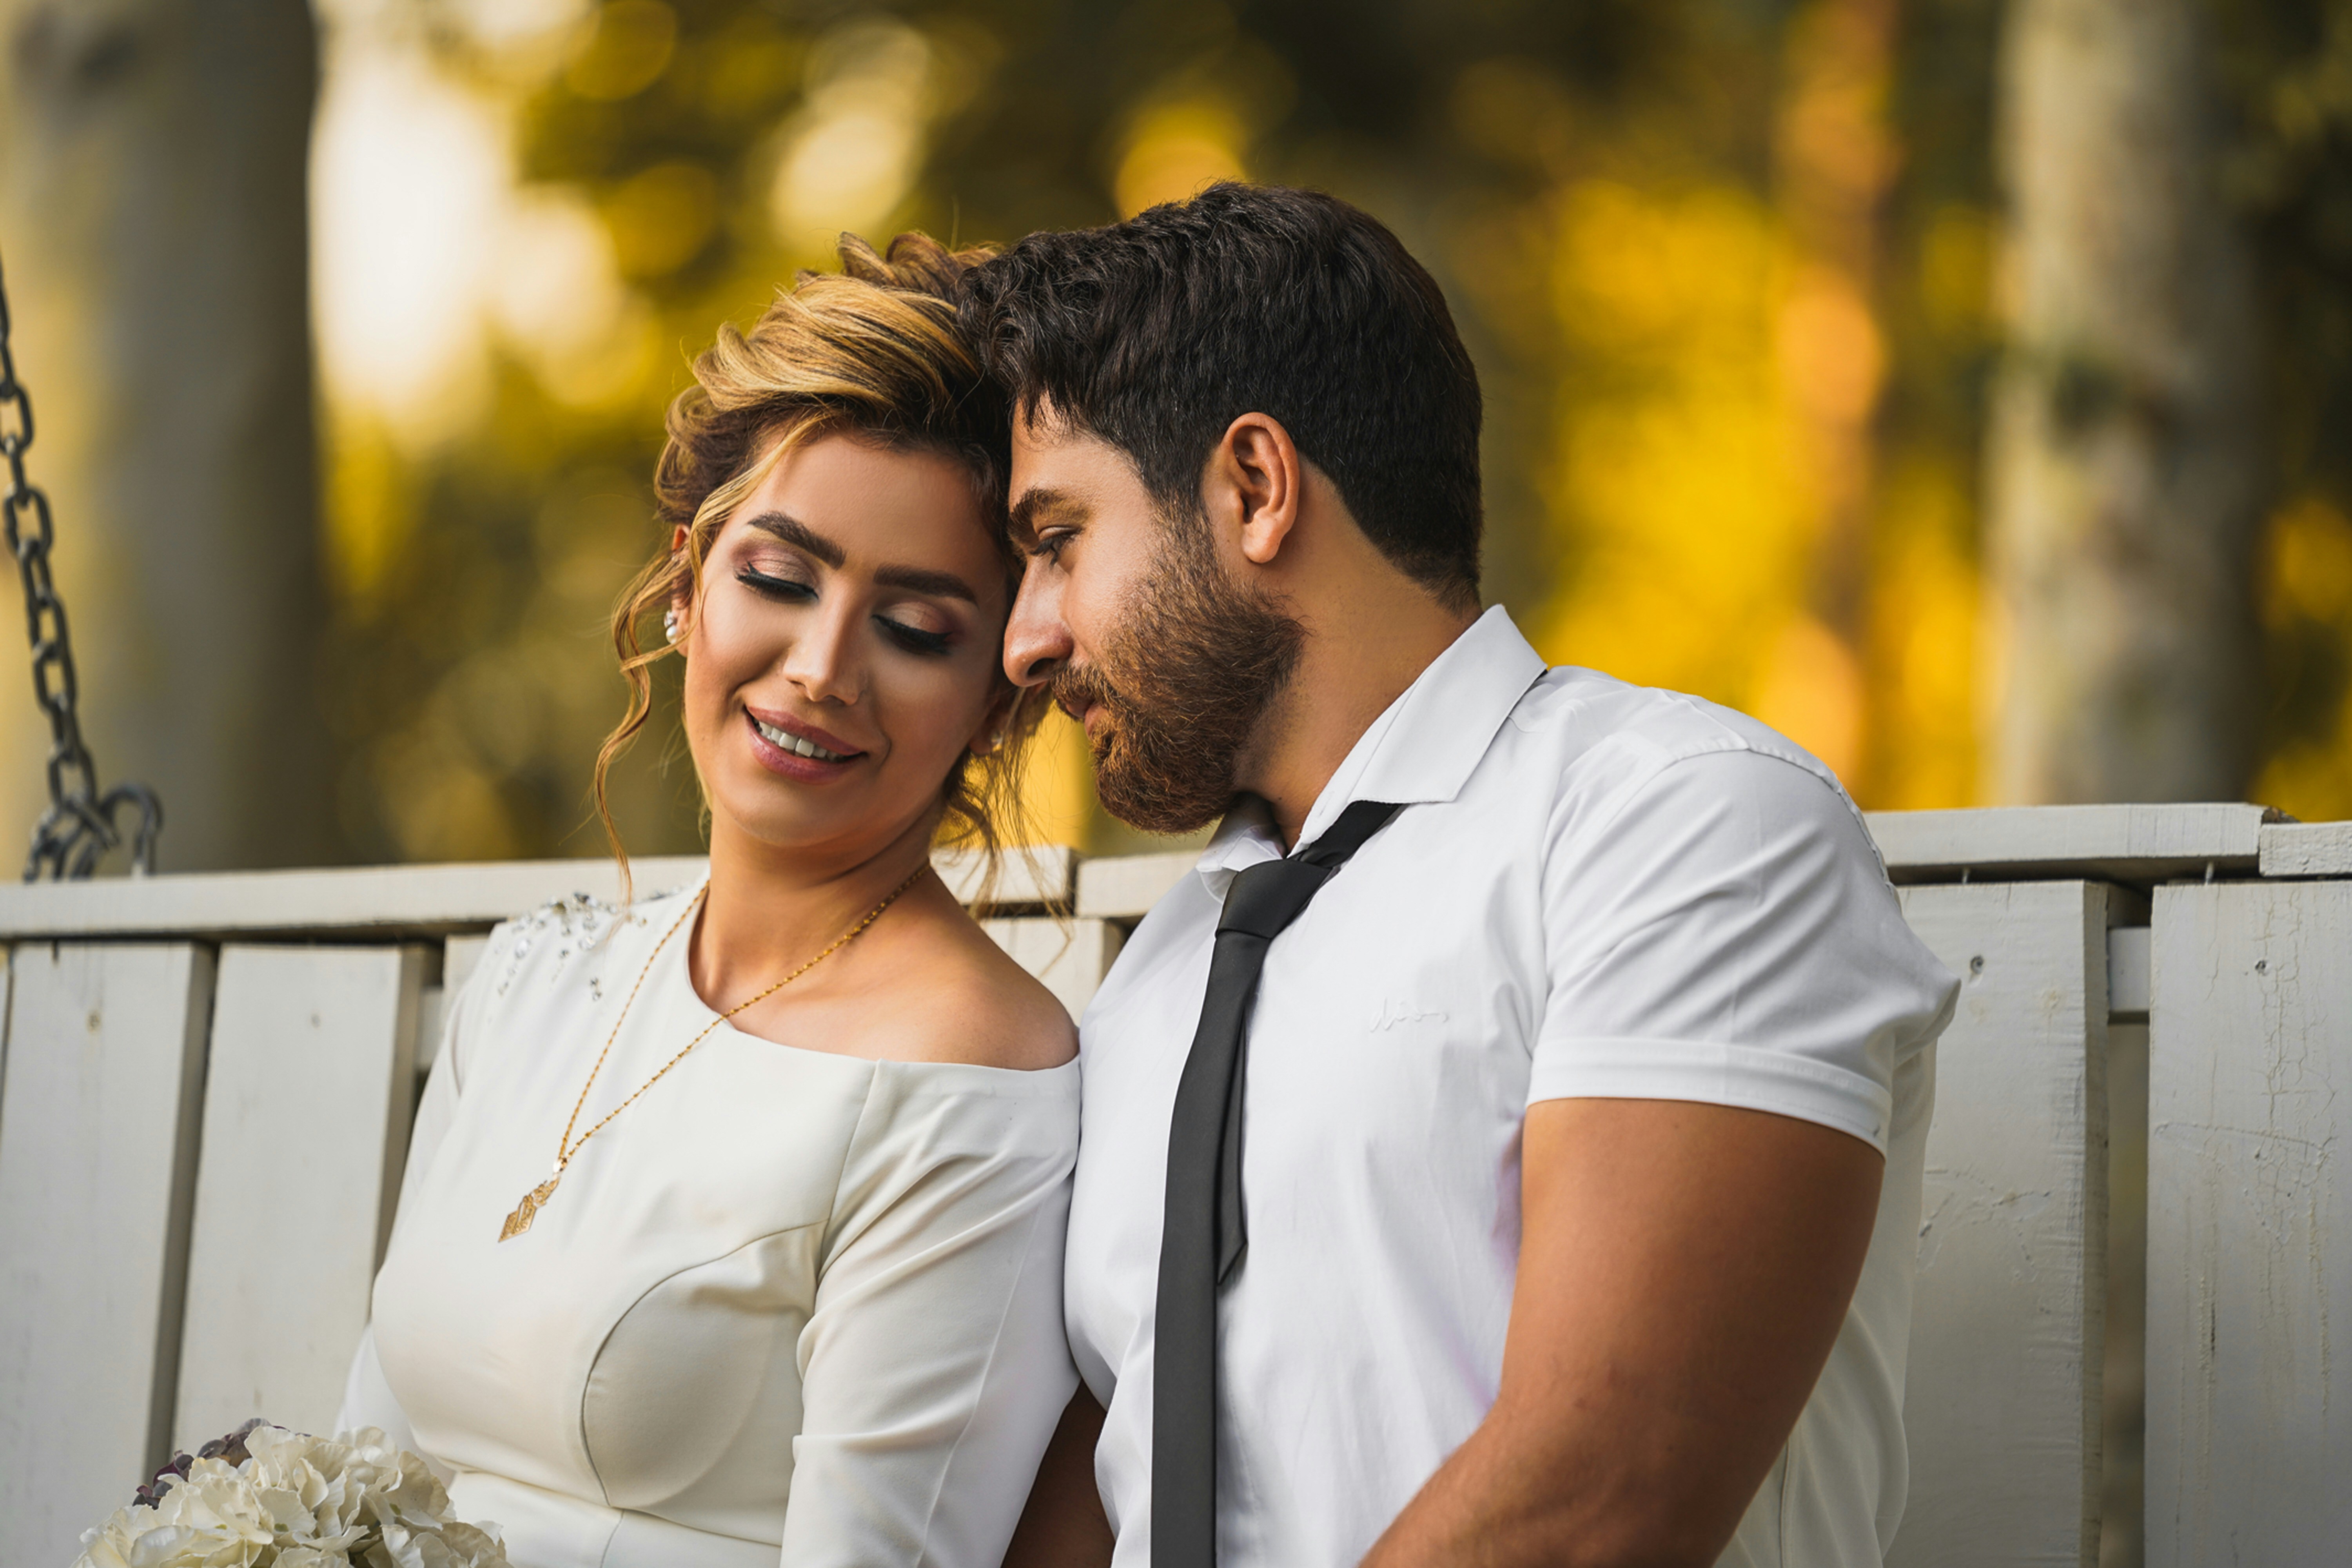 6 Best Dating Sites for Marriage (2022) - Find Commitment Now